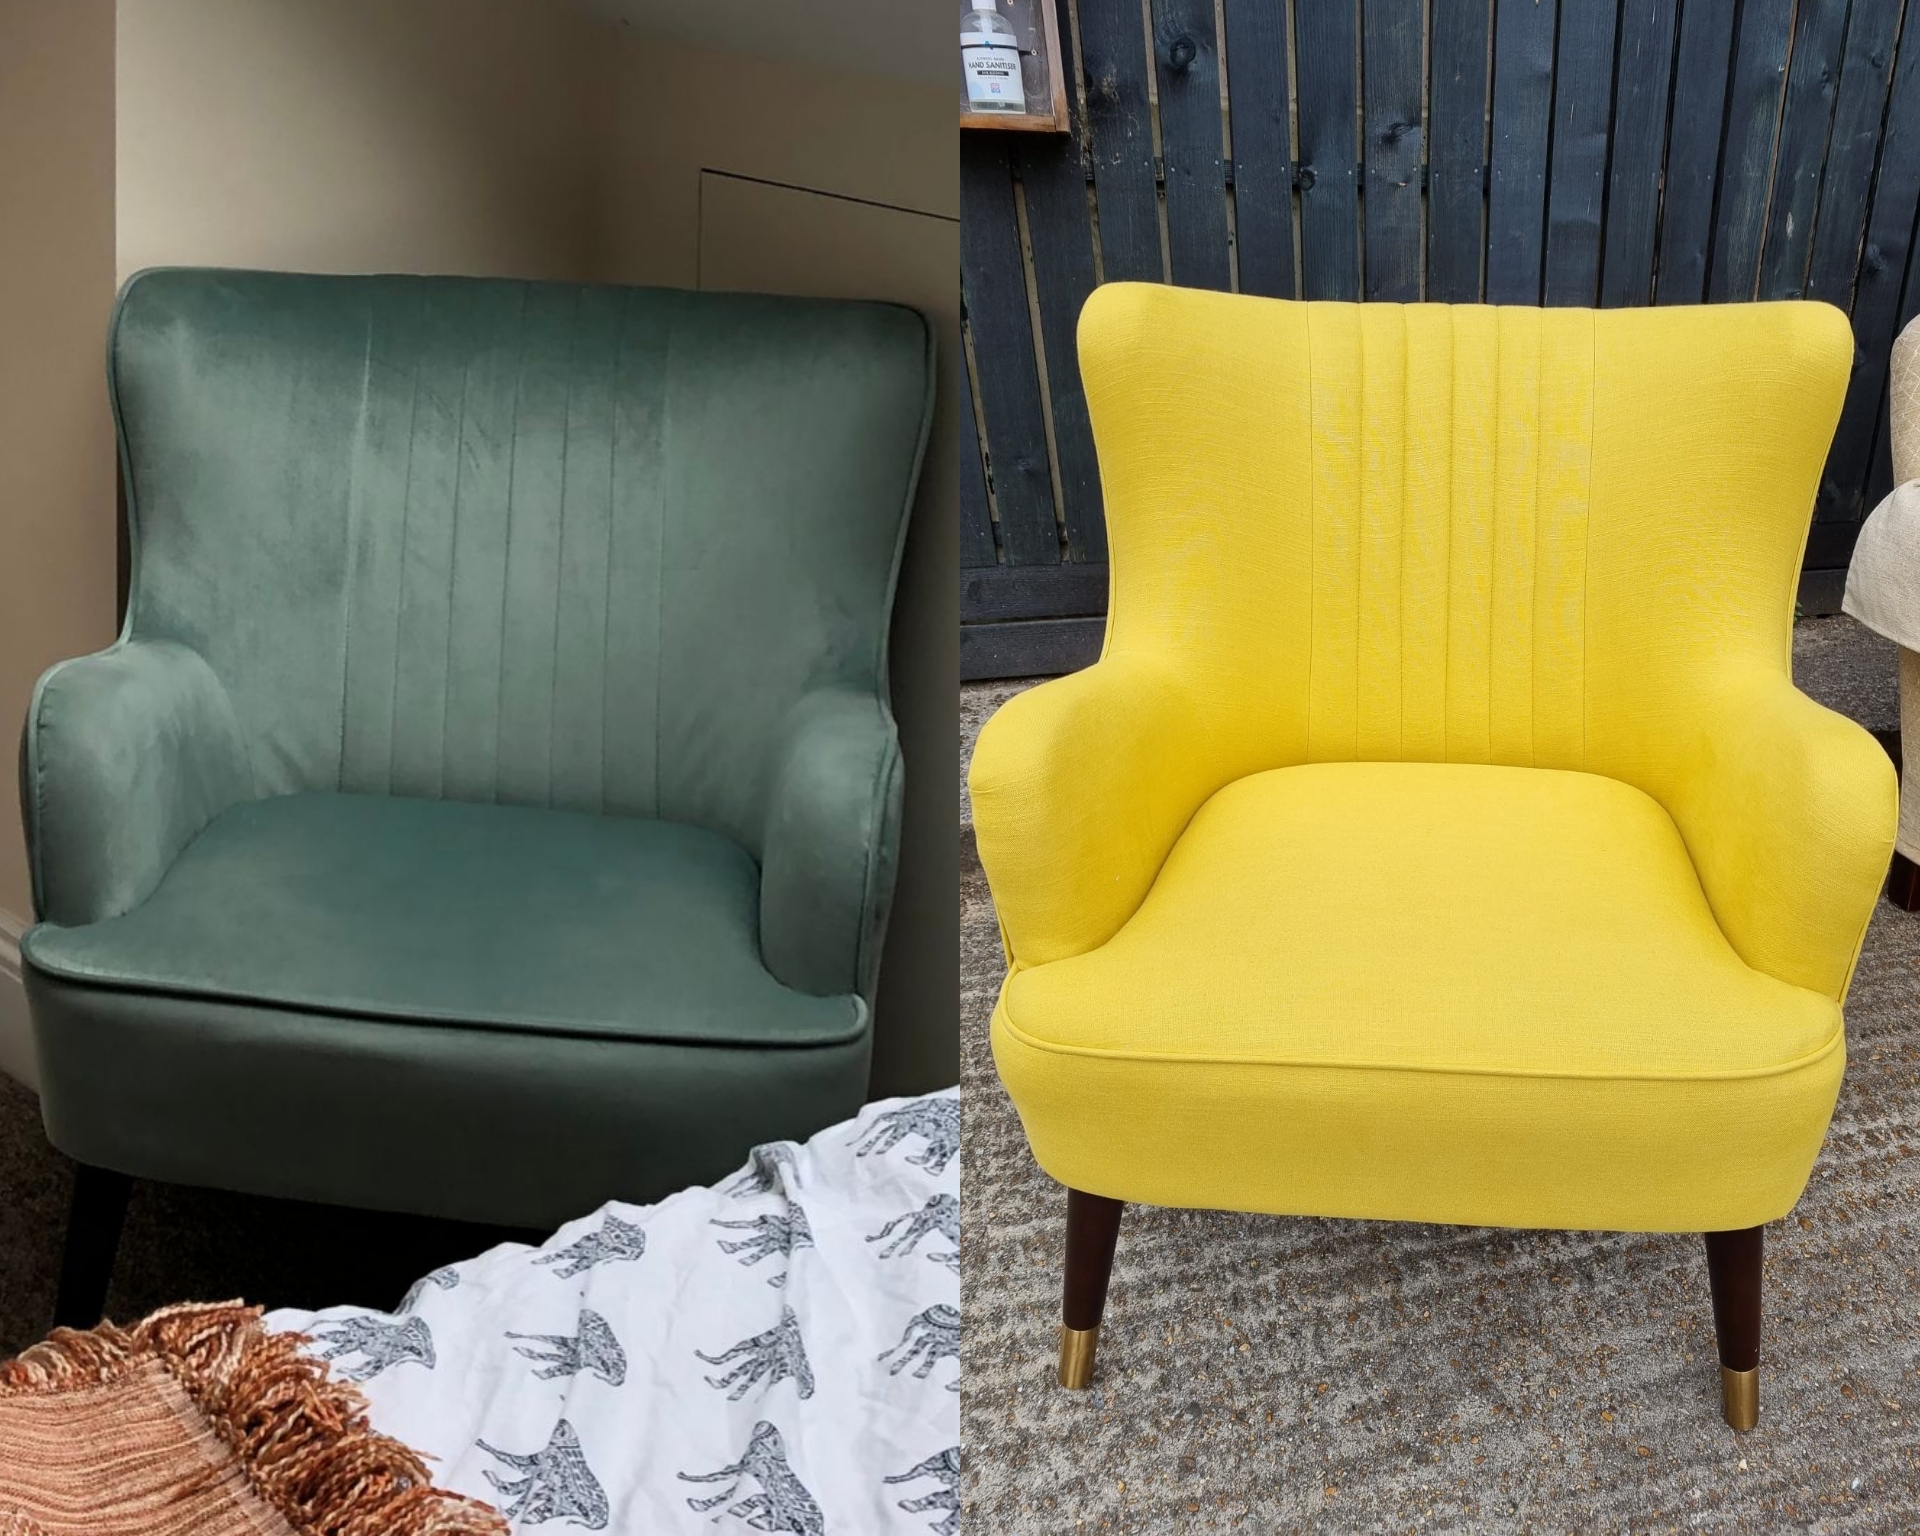 two images showing a before shot of a armchair and after image of a yellow reupholstered chair as part of a bedroom loft renovation